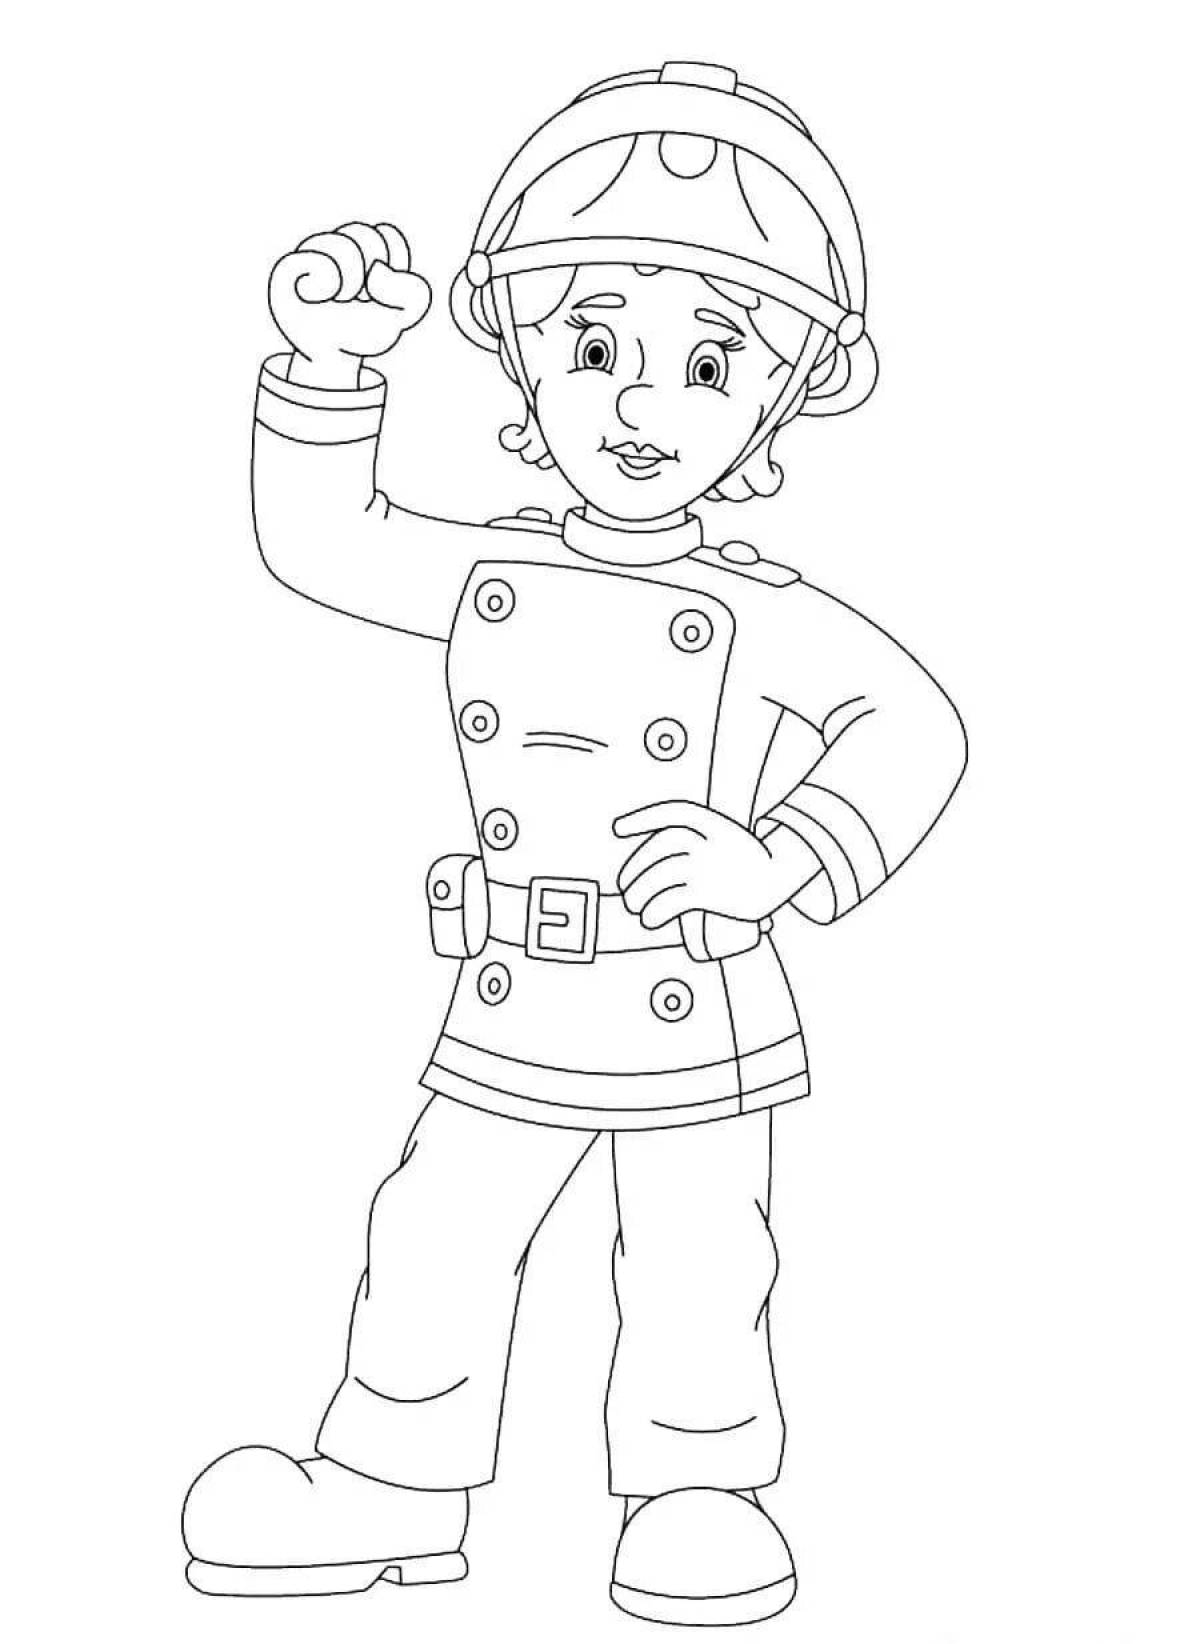 Fireman dynamic coloring book for kids